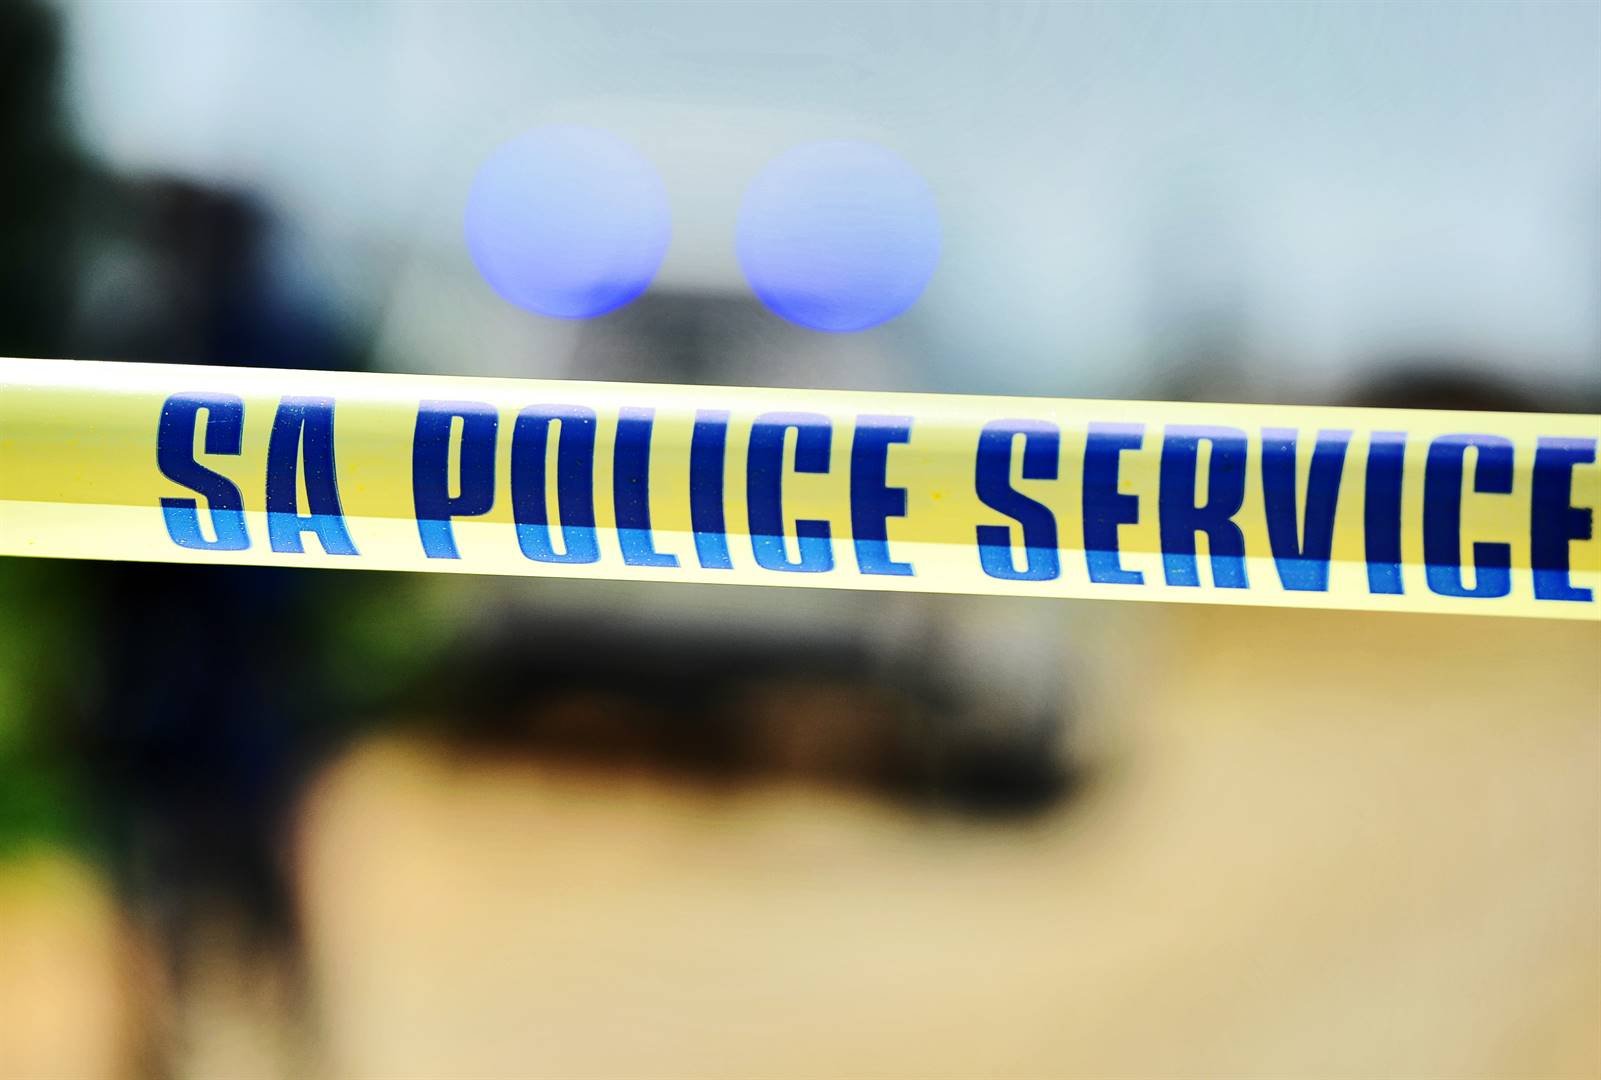 Two children, aged 9 and 13, have found the bodies of their mother and her boyfriend in their home in Polokwane.